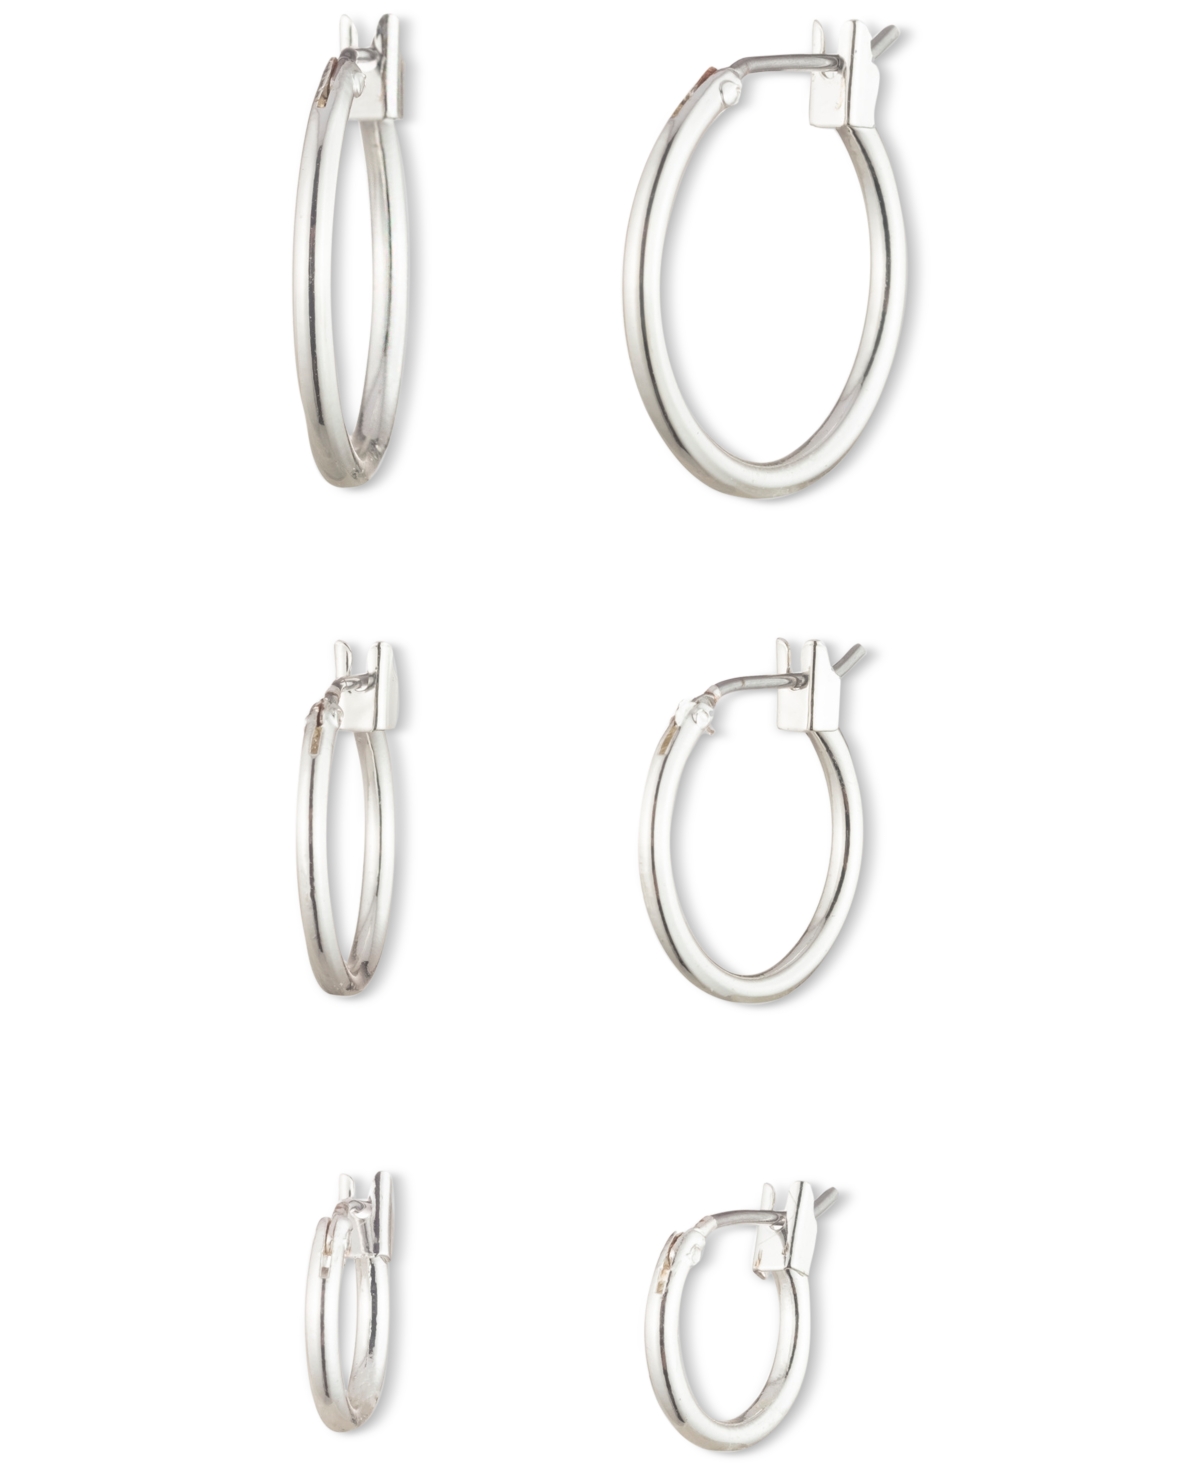 3-Pc. Set Extra-Small & Small Hoop Earrings - Silver